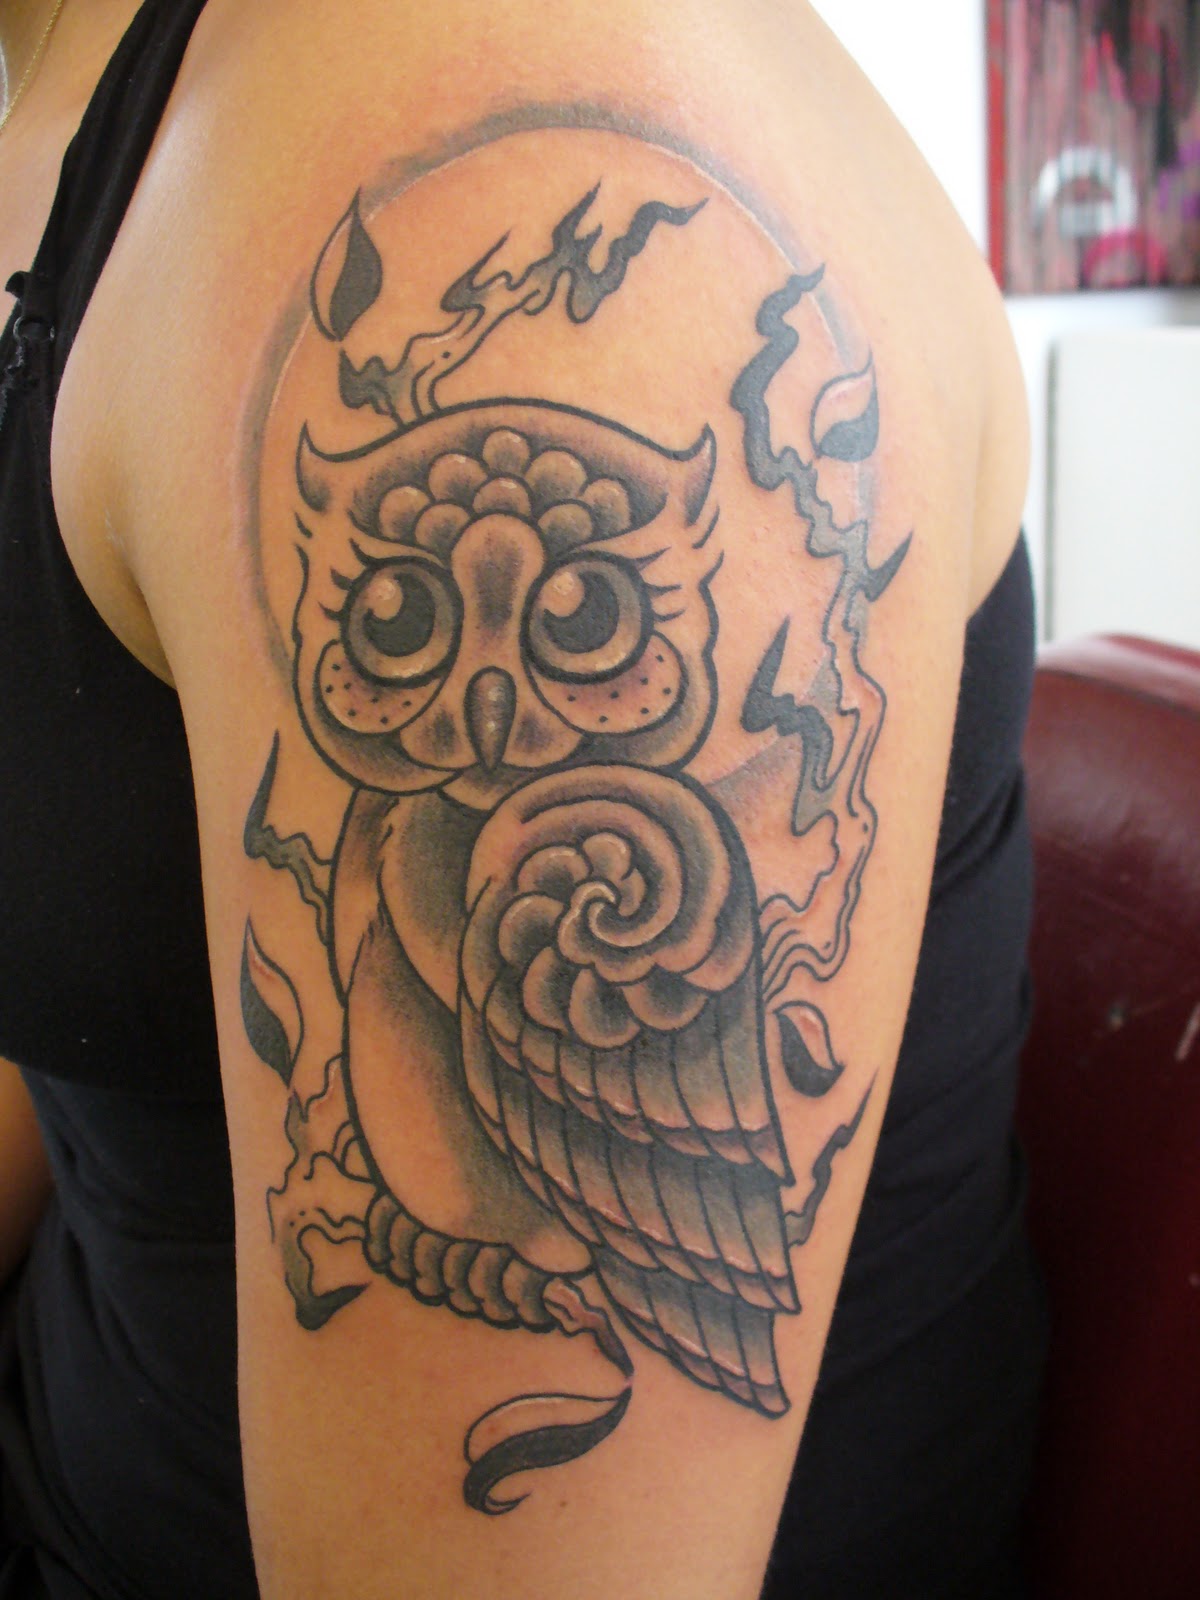 Owl Tattoos Designs, Ideas and Meaning | Tattoos For You